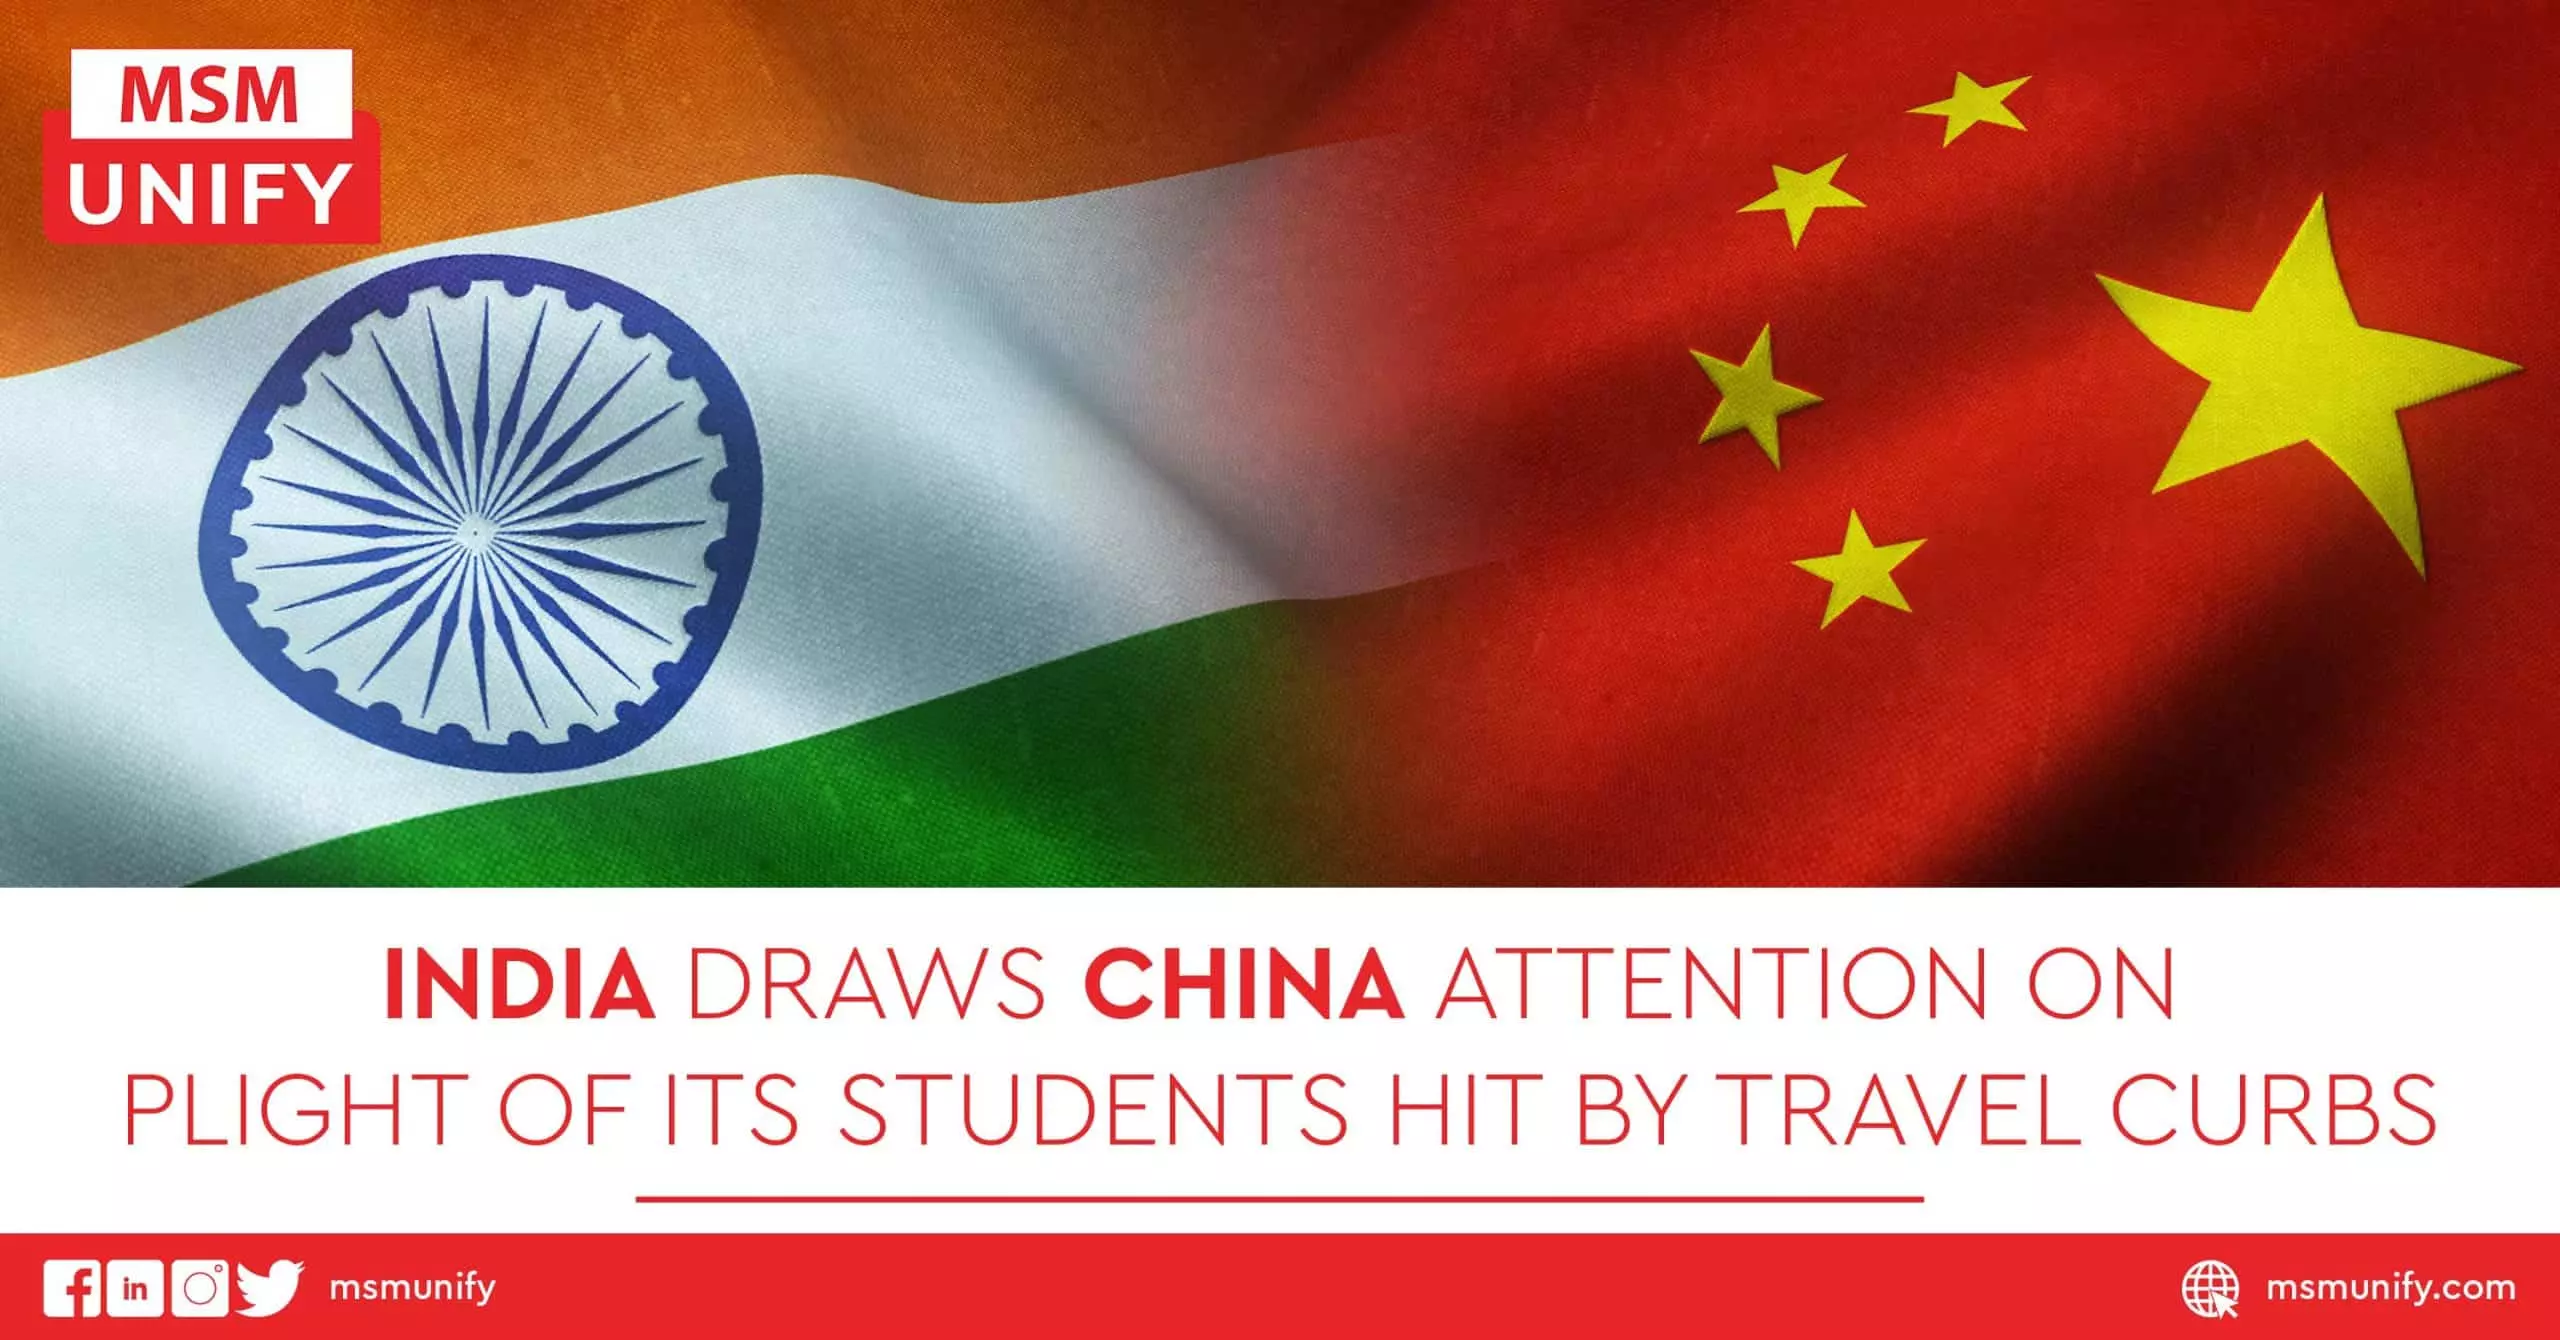 India Draws China Attention on Plight of Its Students Hit by Travel Curbs scaled 1